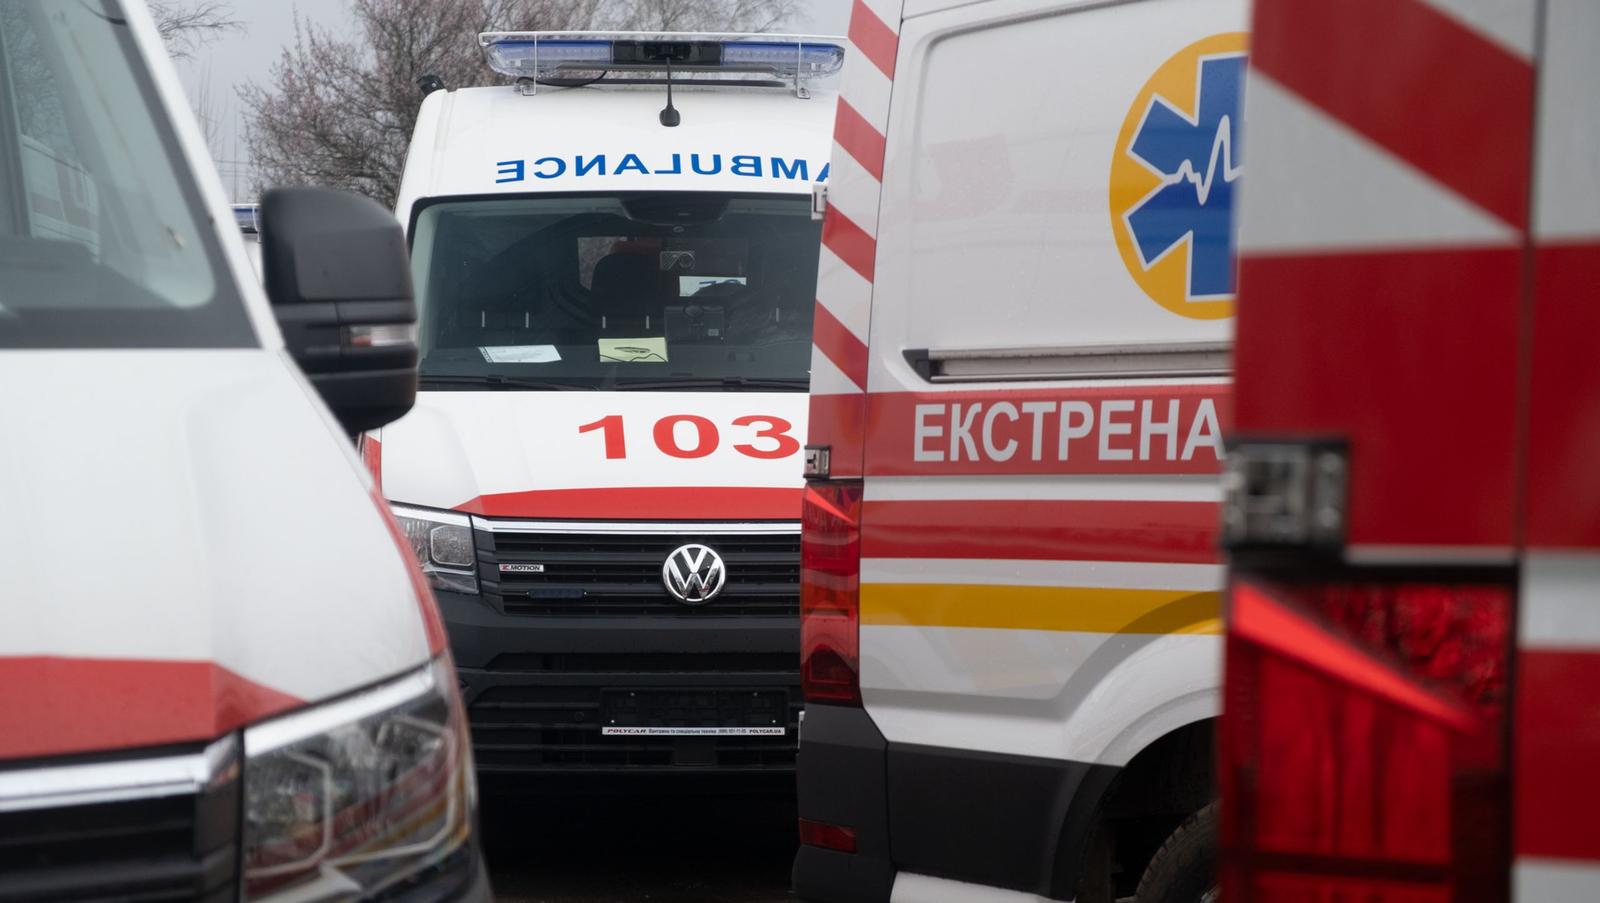 12 four-wheel drive ambulances were sent to five oblasts of Ukraine: Dnipropetrovsk, Volyn, Rivne, Ivano-Frankivsk and Sumy